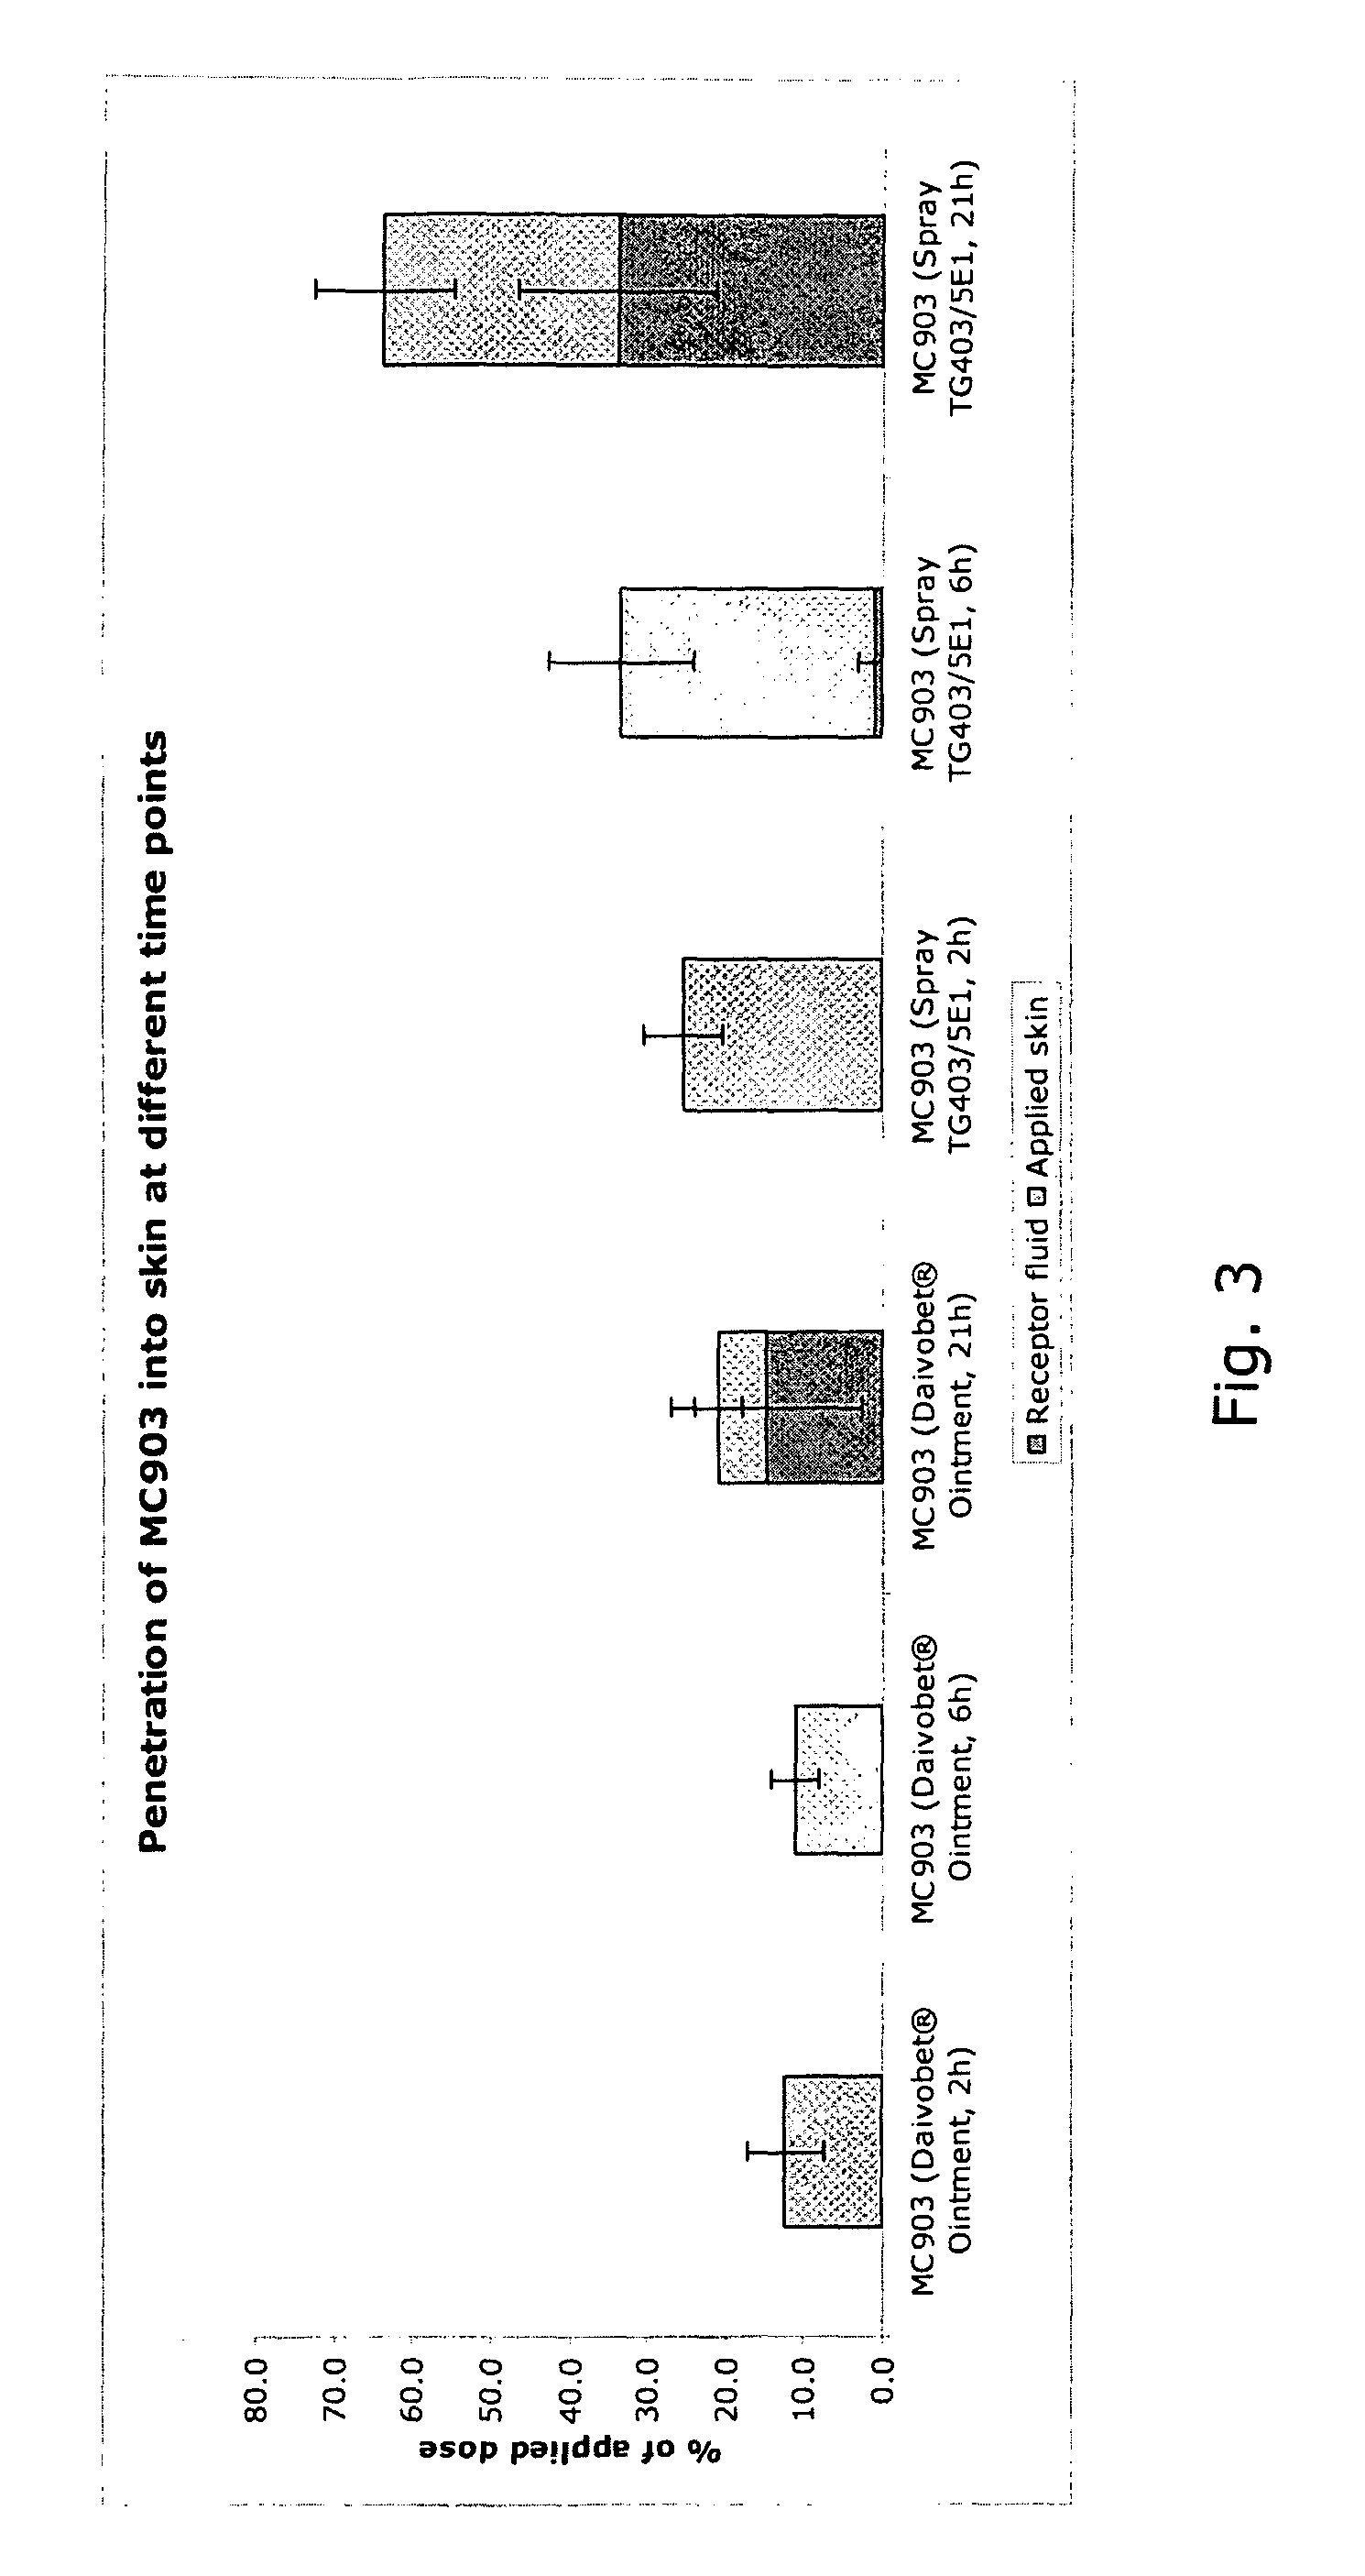 Pharmaceutical spray composition comprising a vitamin D analogue and a corticosteroid